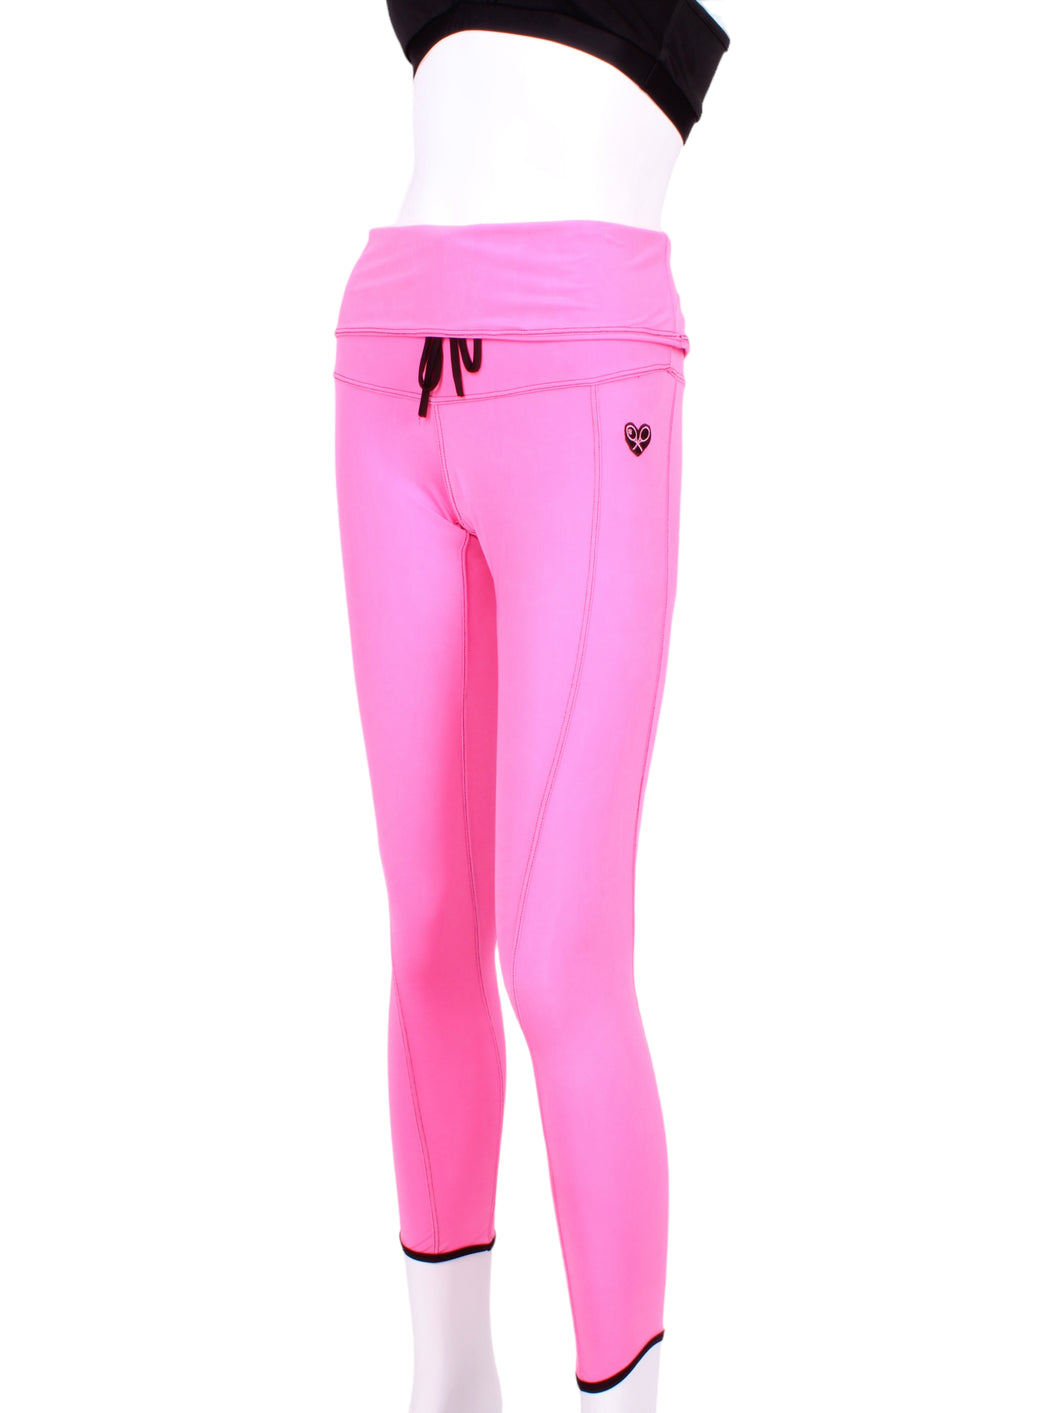 This is our limited edition rolled/high waist leggings in Pink.  This piece has a silky soft and quick-drying.  We make these in very small quantities - by design.  Unique.  Luxurious.  Comfortable.  Cool.  Fun.